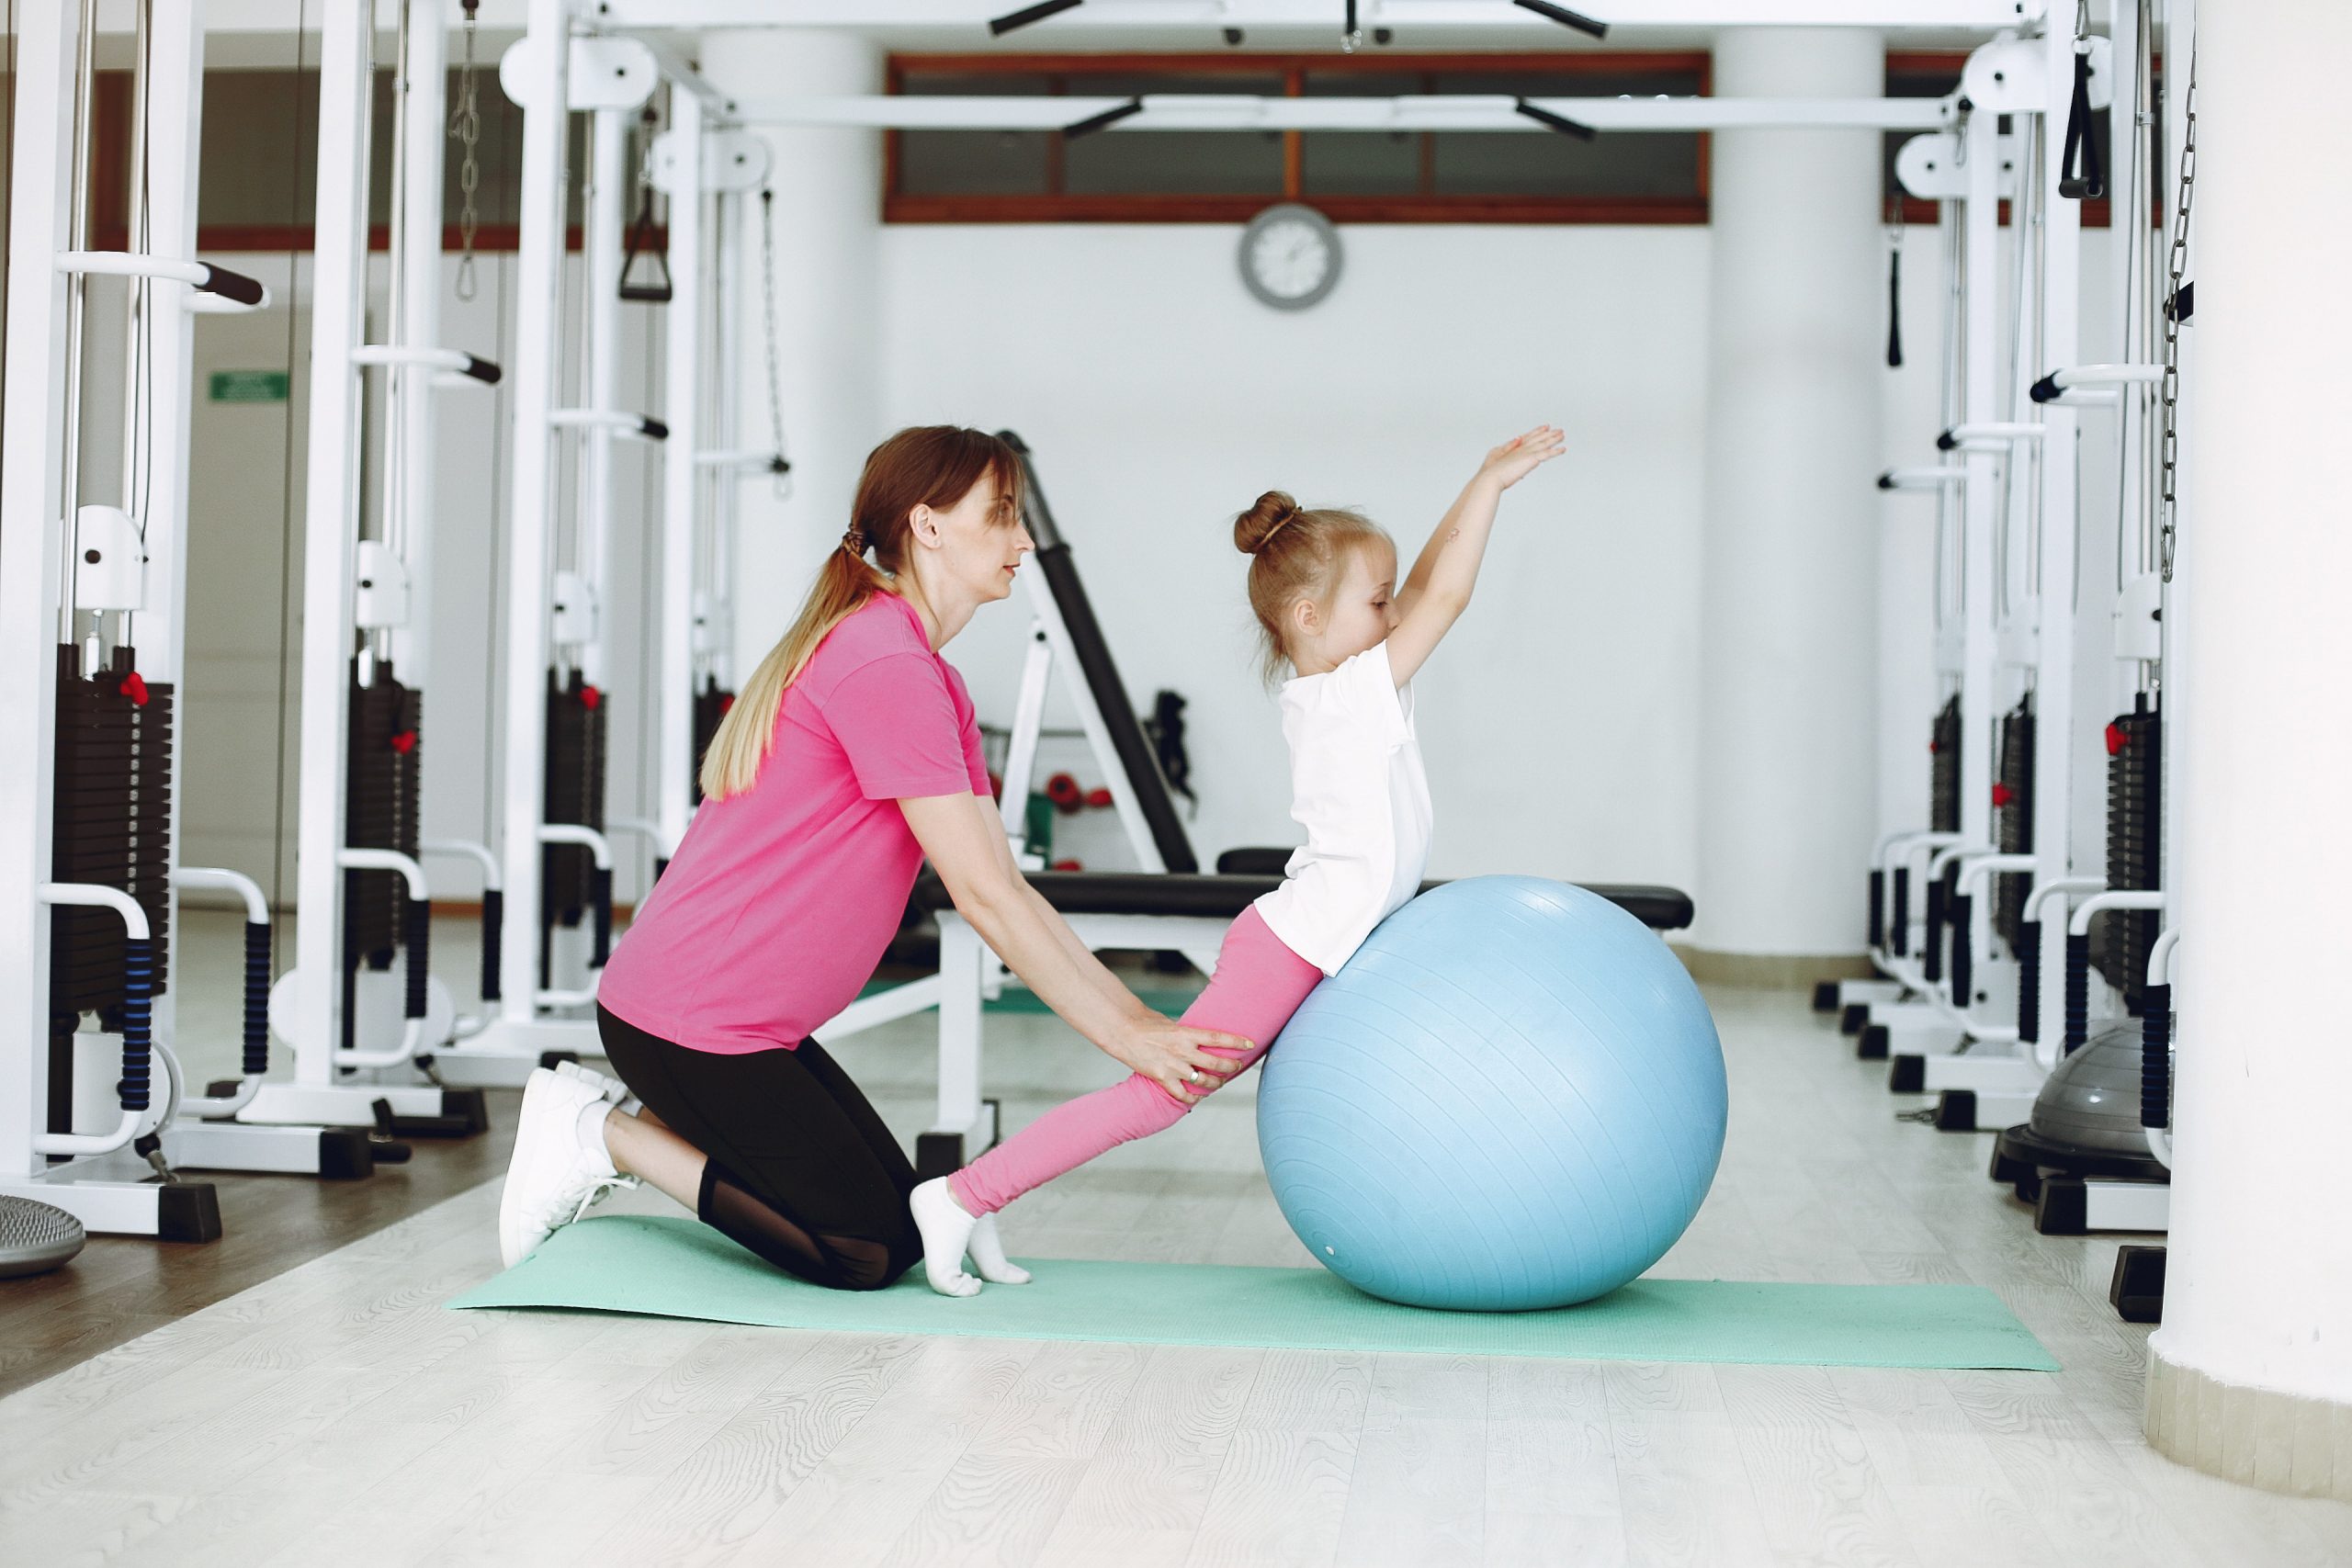 Mother with little daughter are engaged in gymnastics in the gym